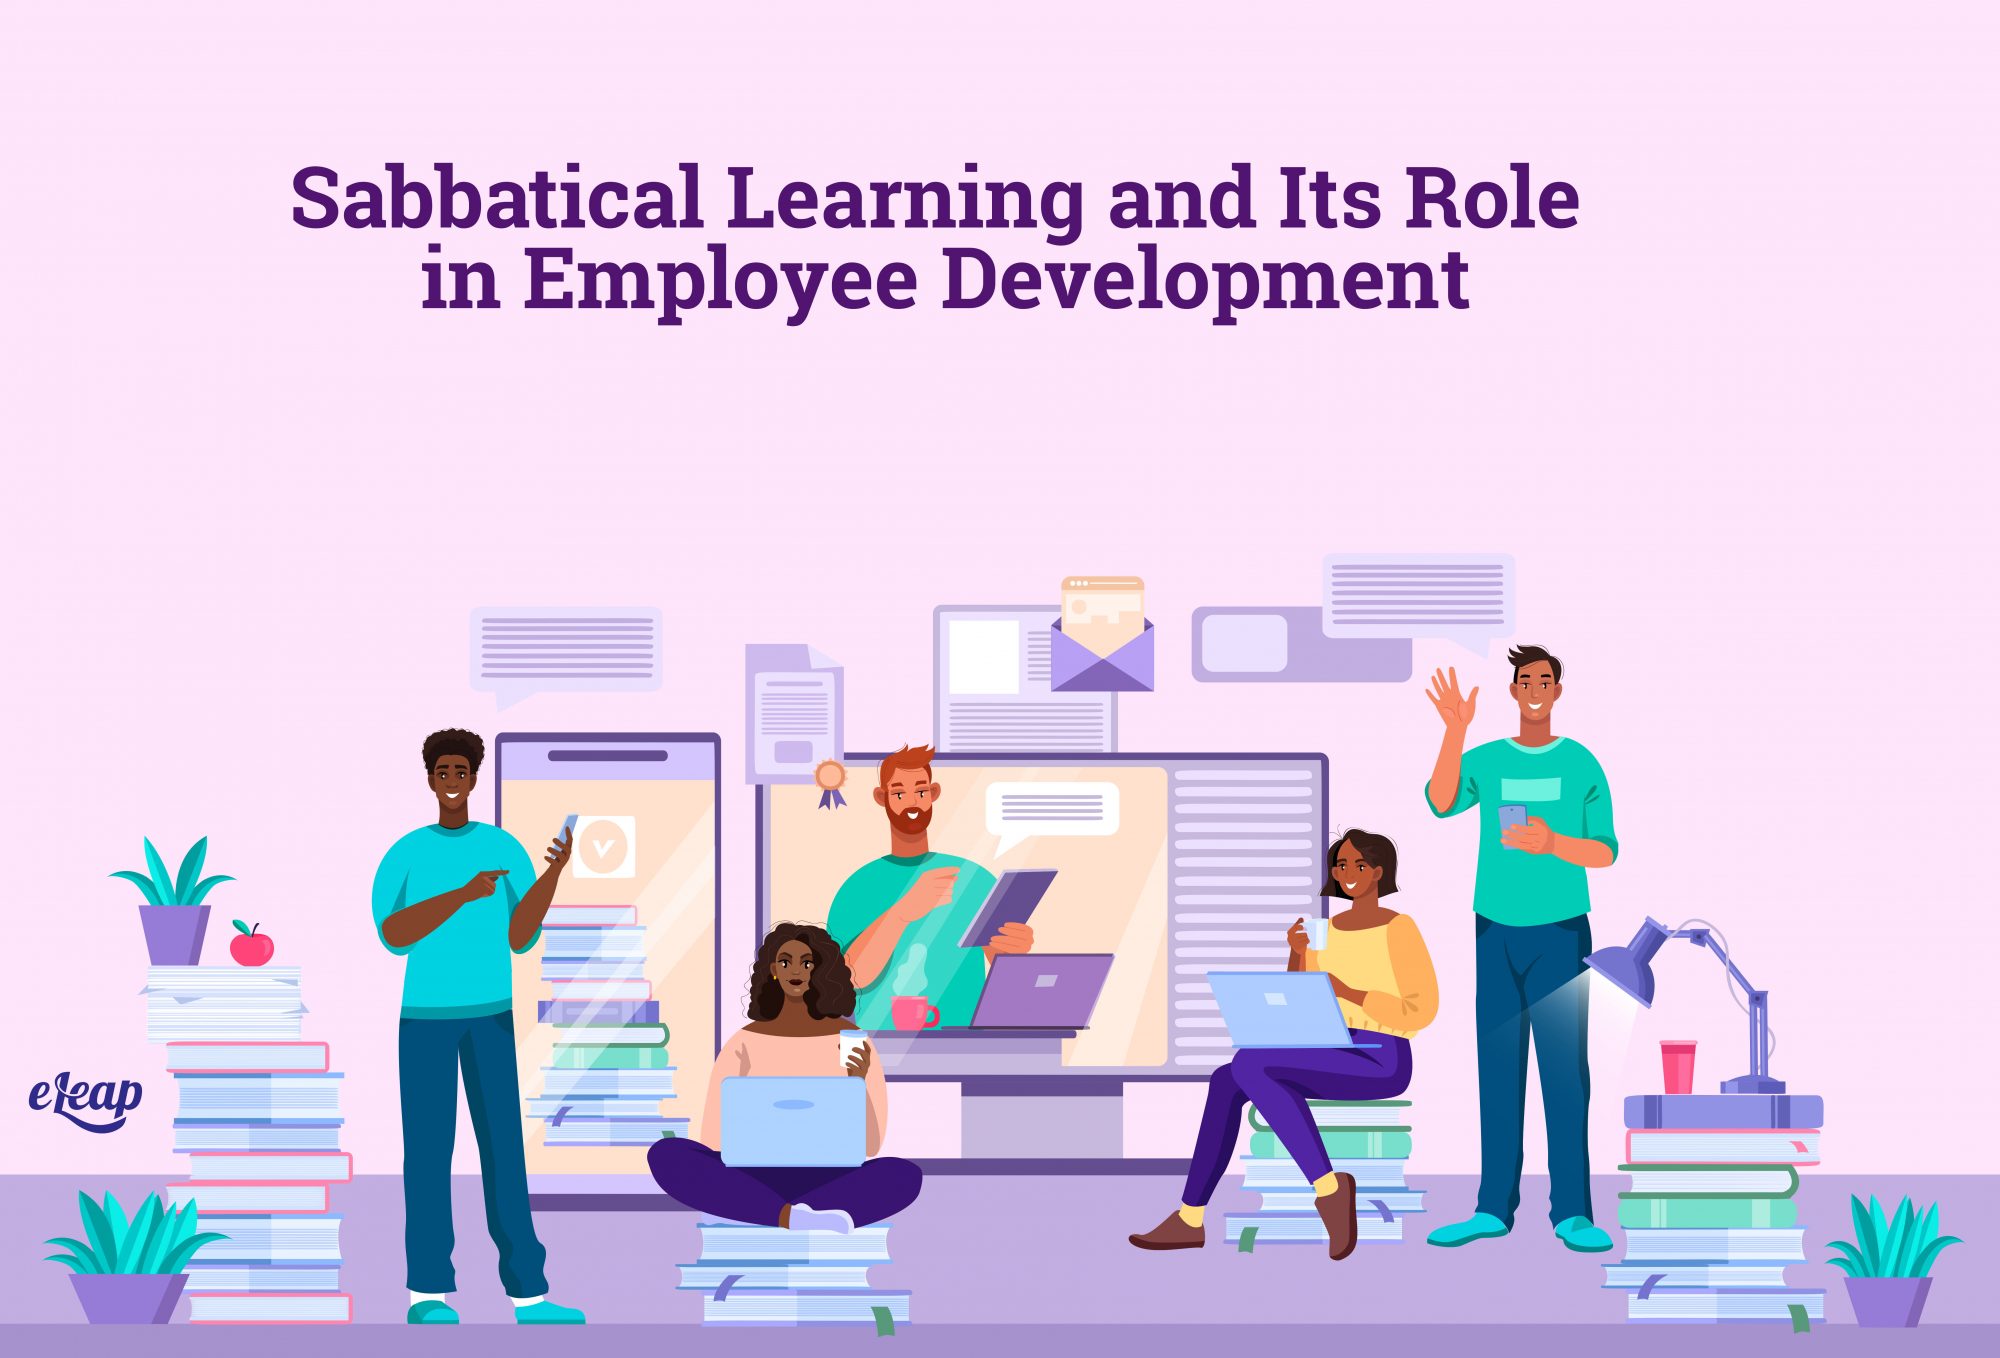 Sabbatical Learning and Its Role in Employee Development